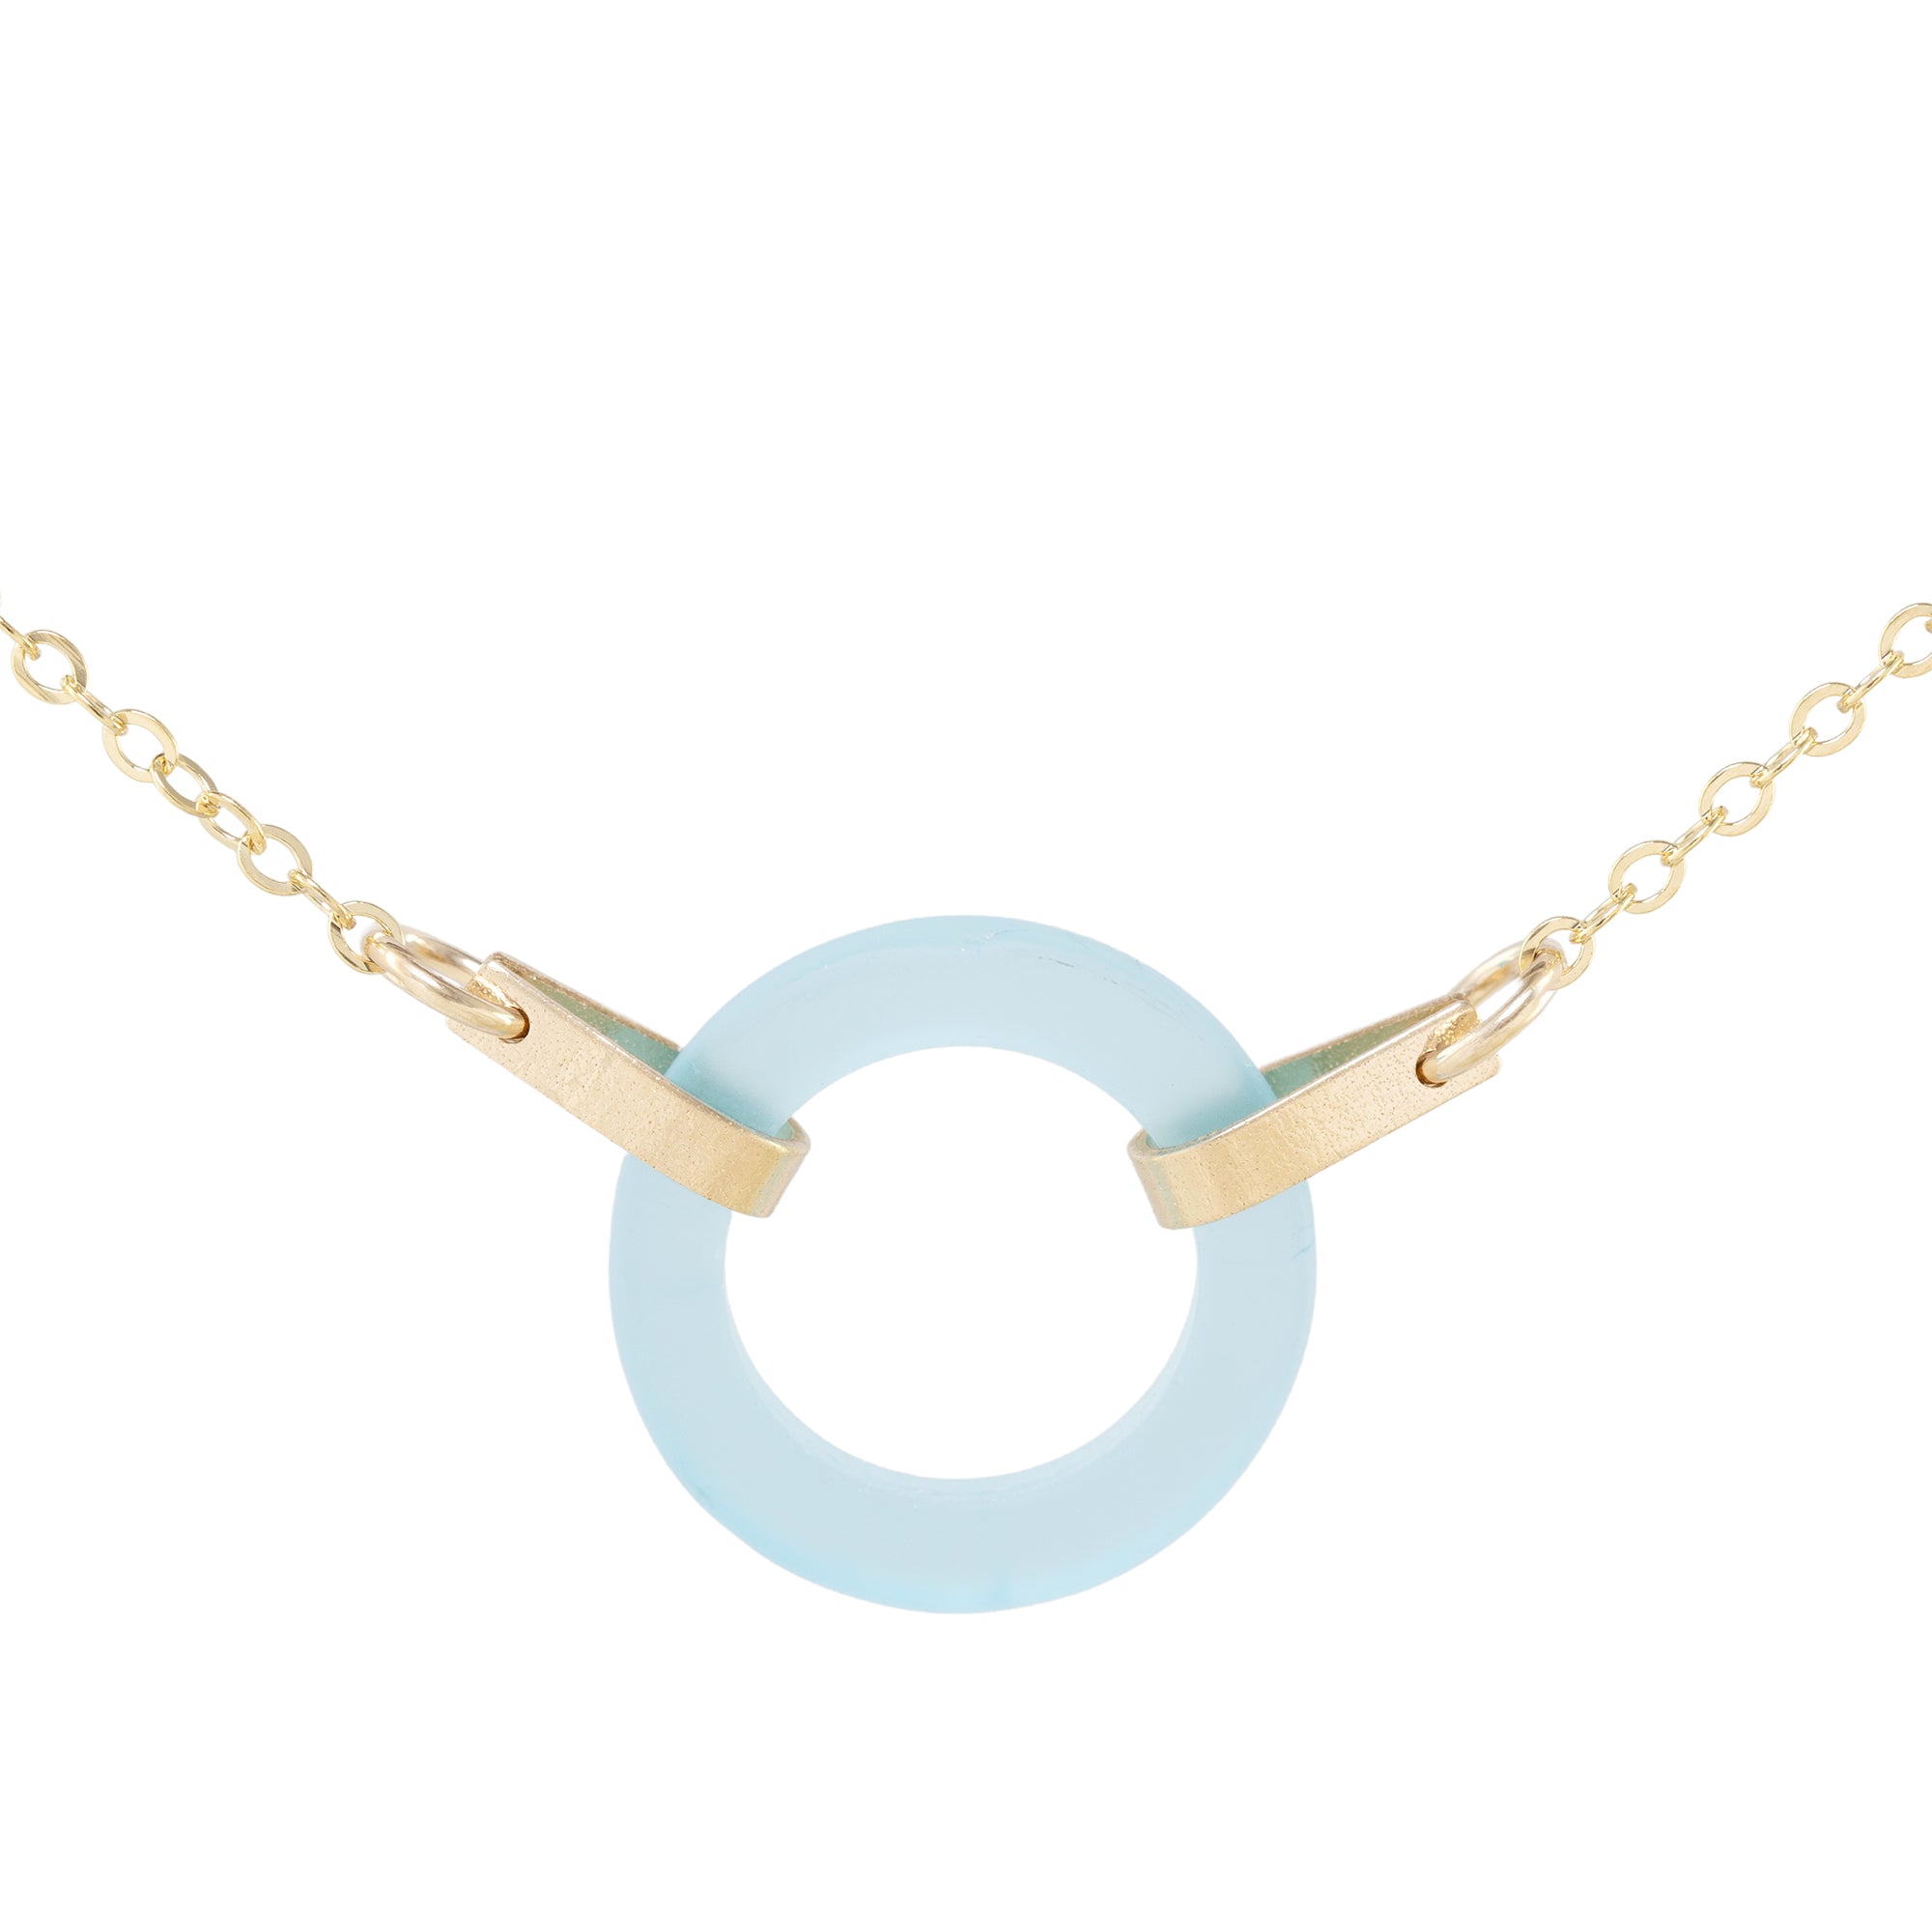 Light Baby Blue Recycled Glass Open Circle and 14K Gold Fill Strap Style Necklace